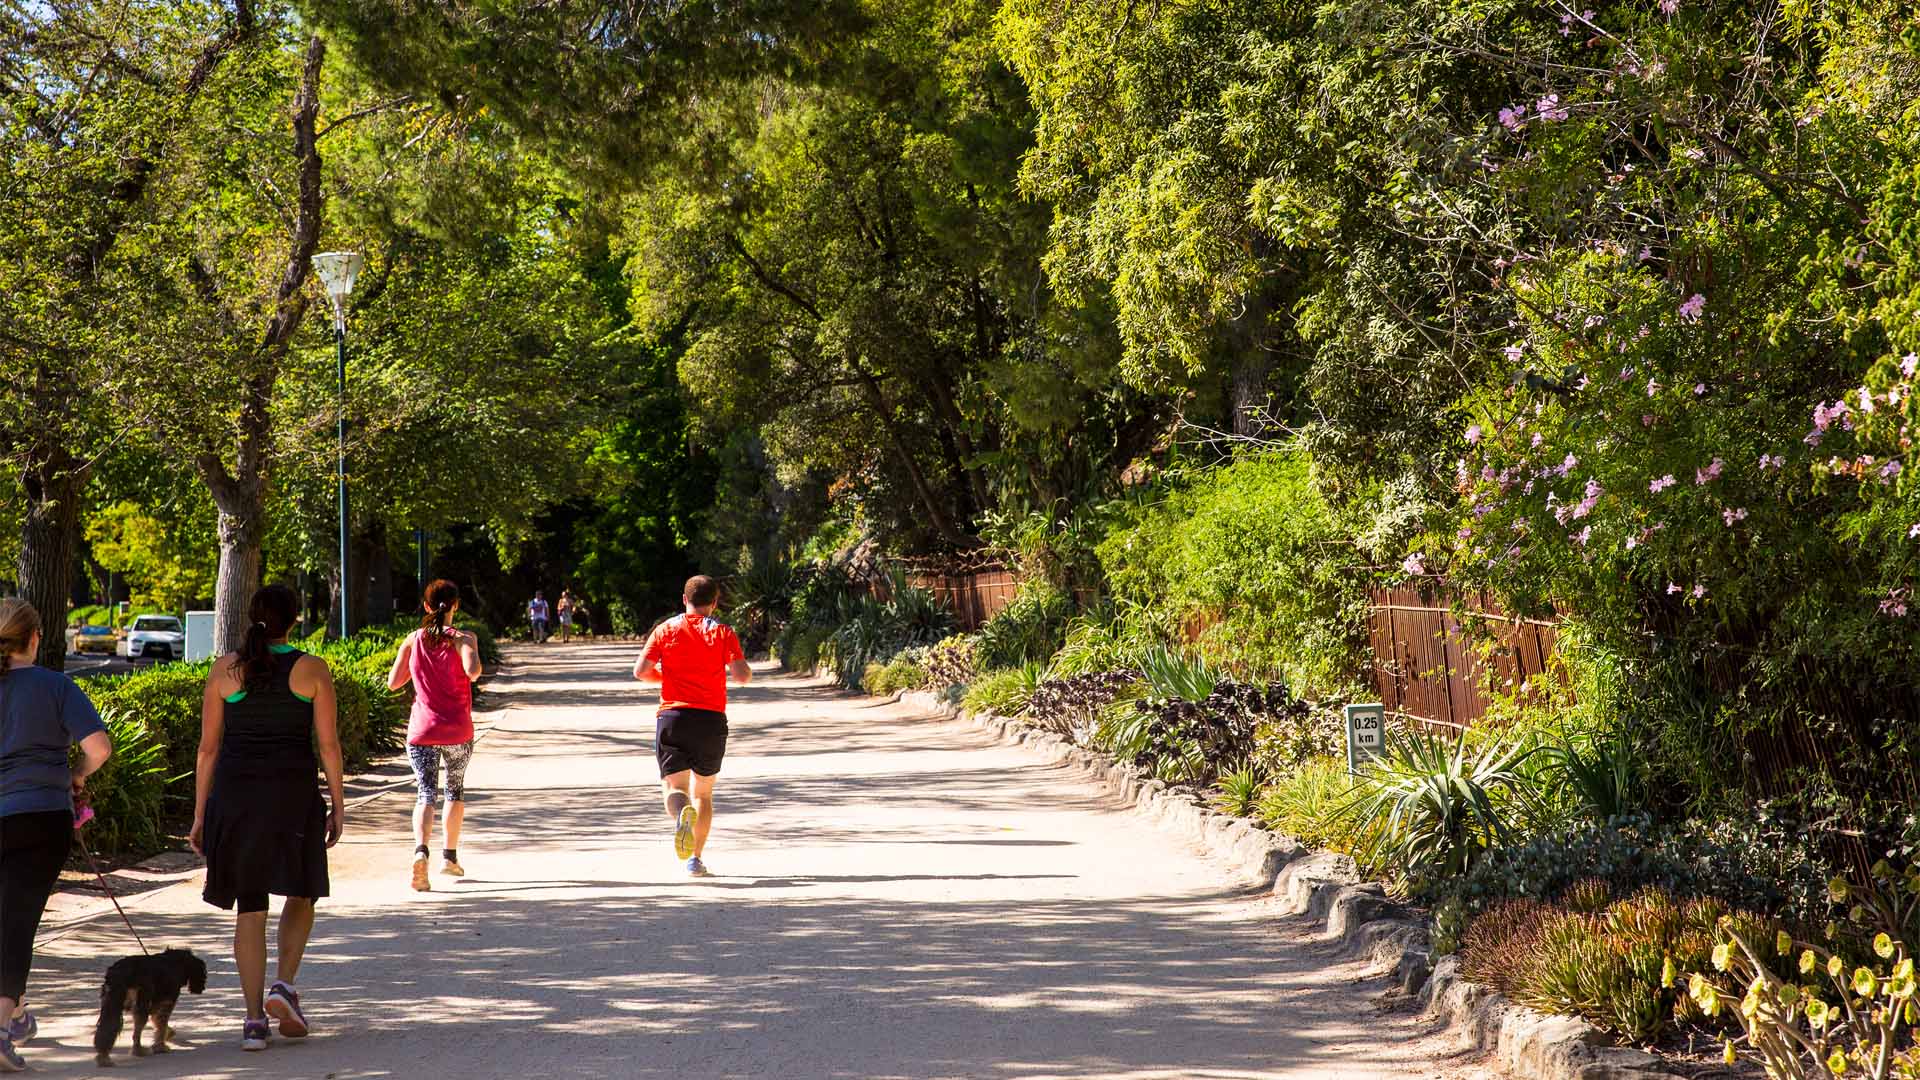 Five Creative Ways to Hit 60 Kilometres in Melbourne That Aren't Going for a Bush Walk